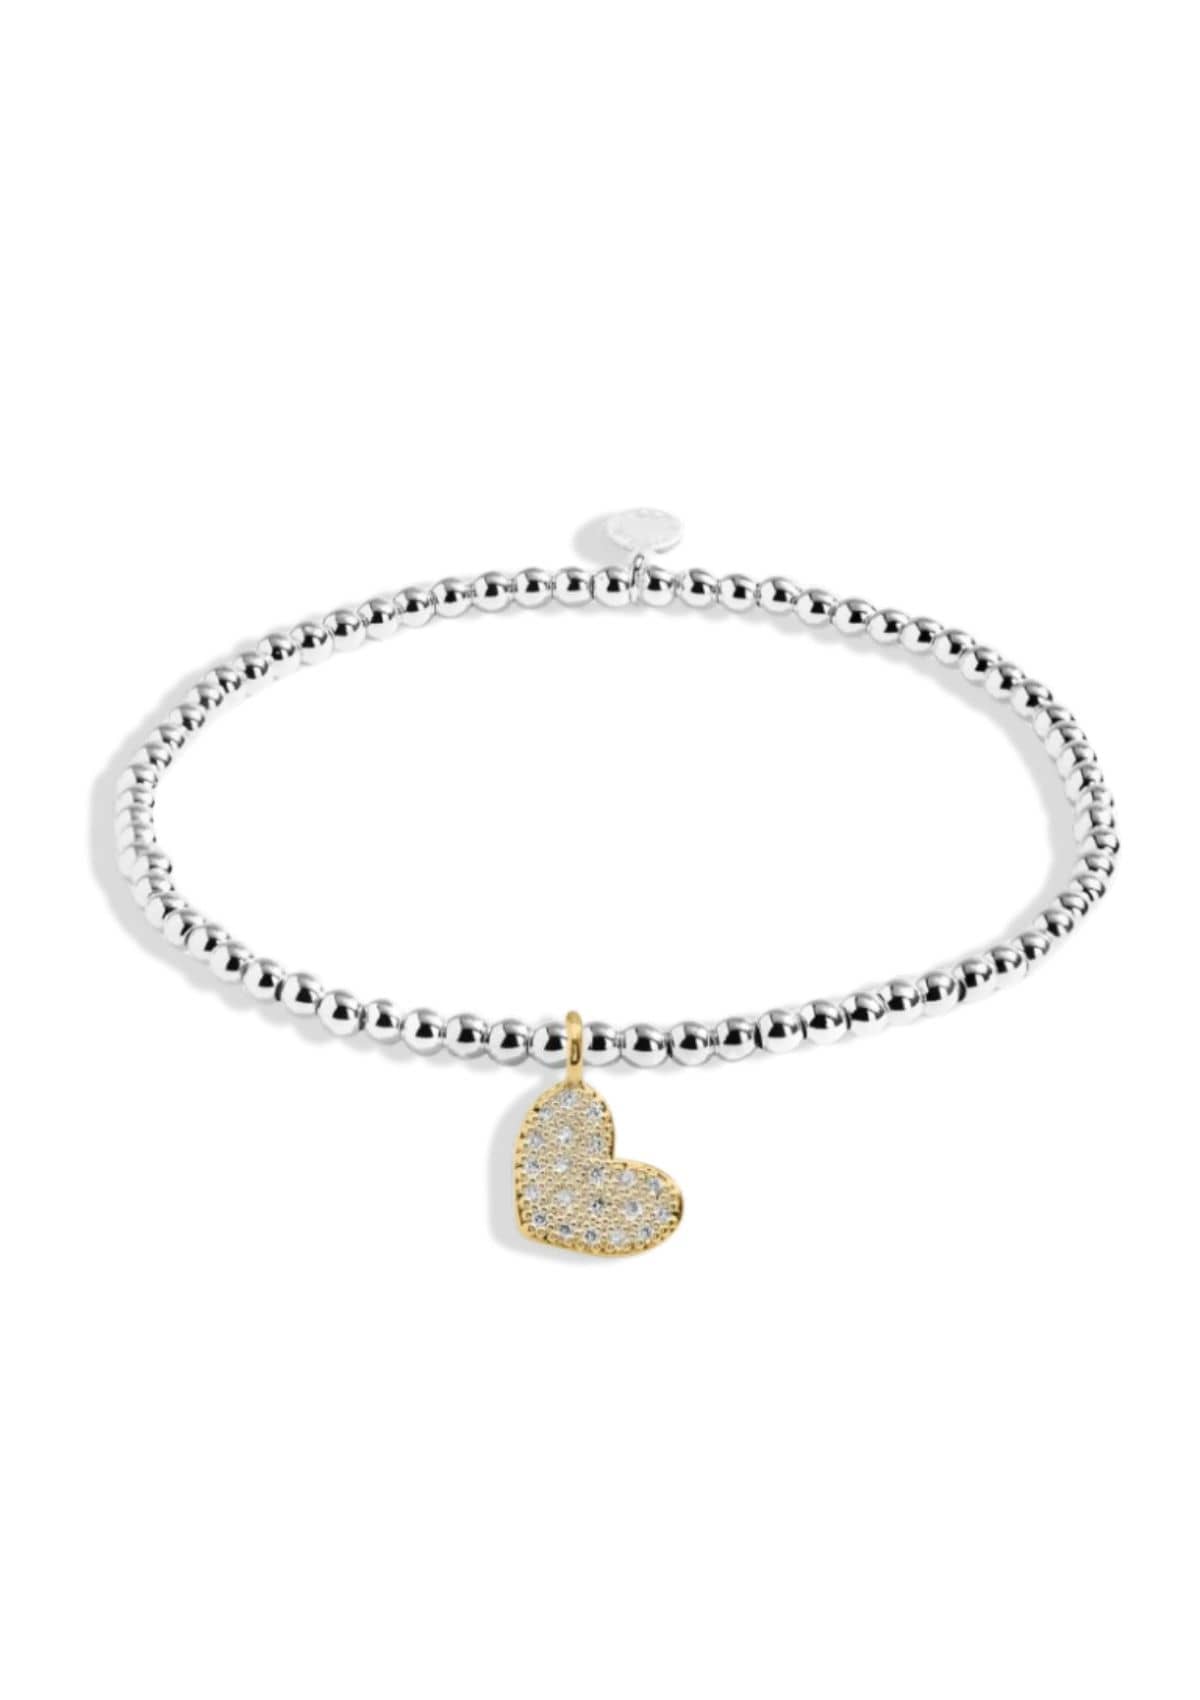 "Bride" Silver and Gold Stretch Bracelet -A Littles & CO- Ruby Jane-